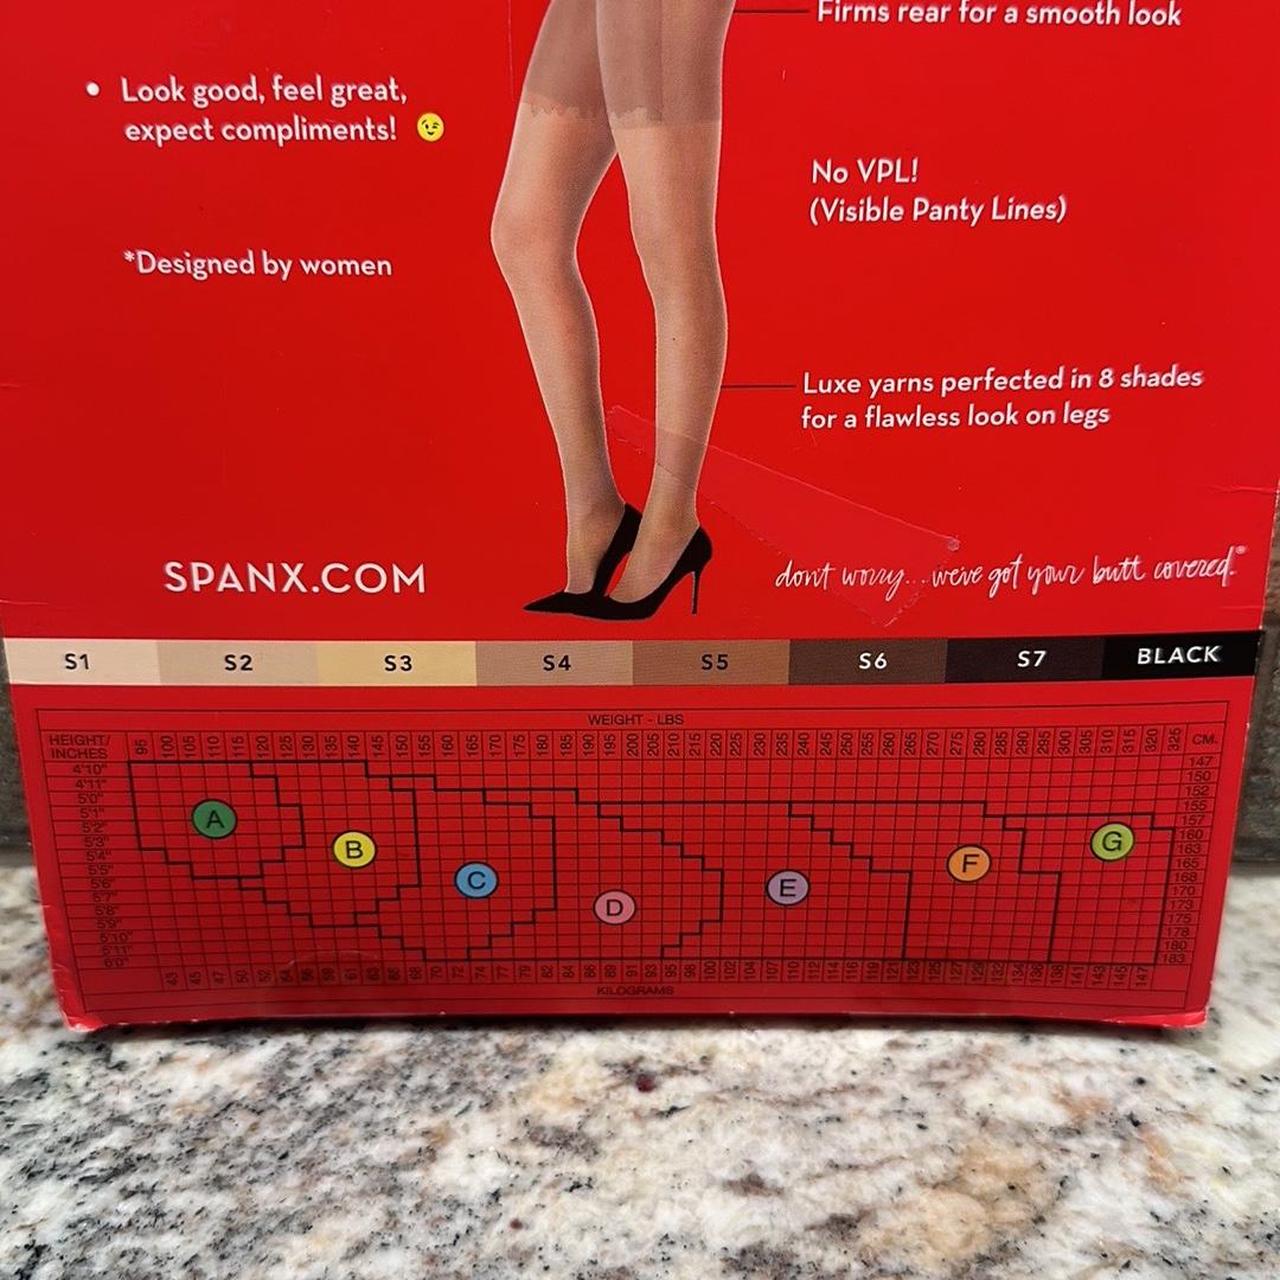 SPANX Firm Believer Shaping Sheers Pantyhose Size C - Depop